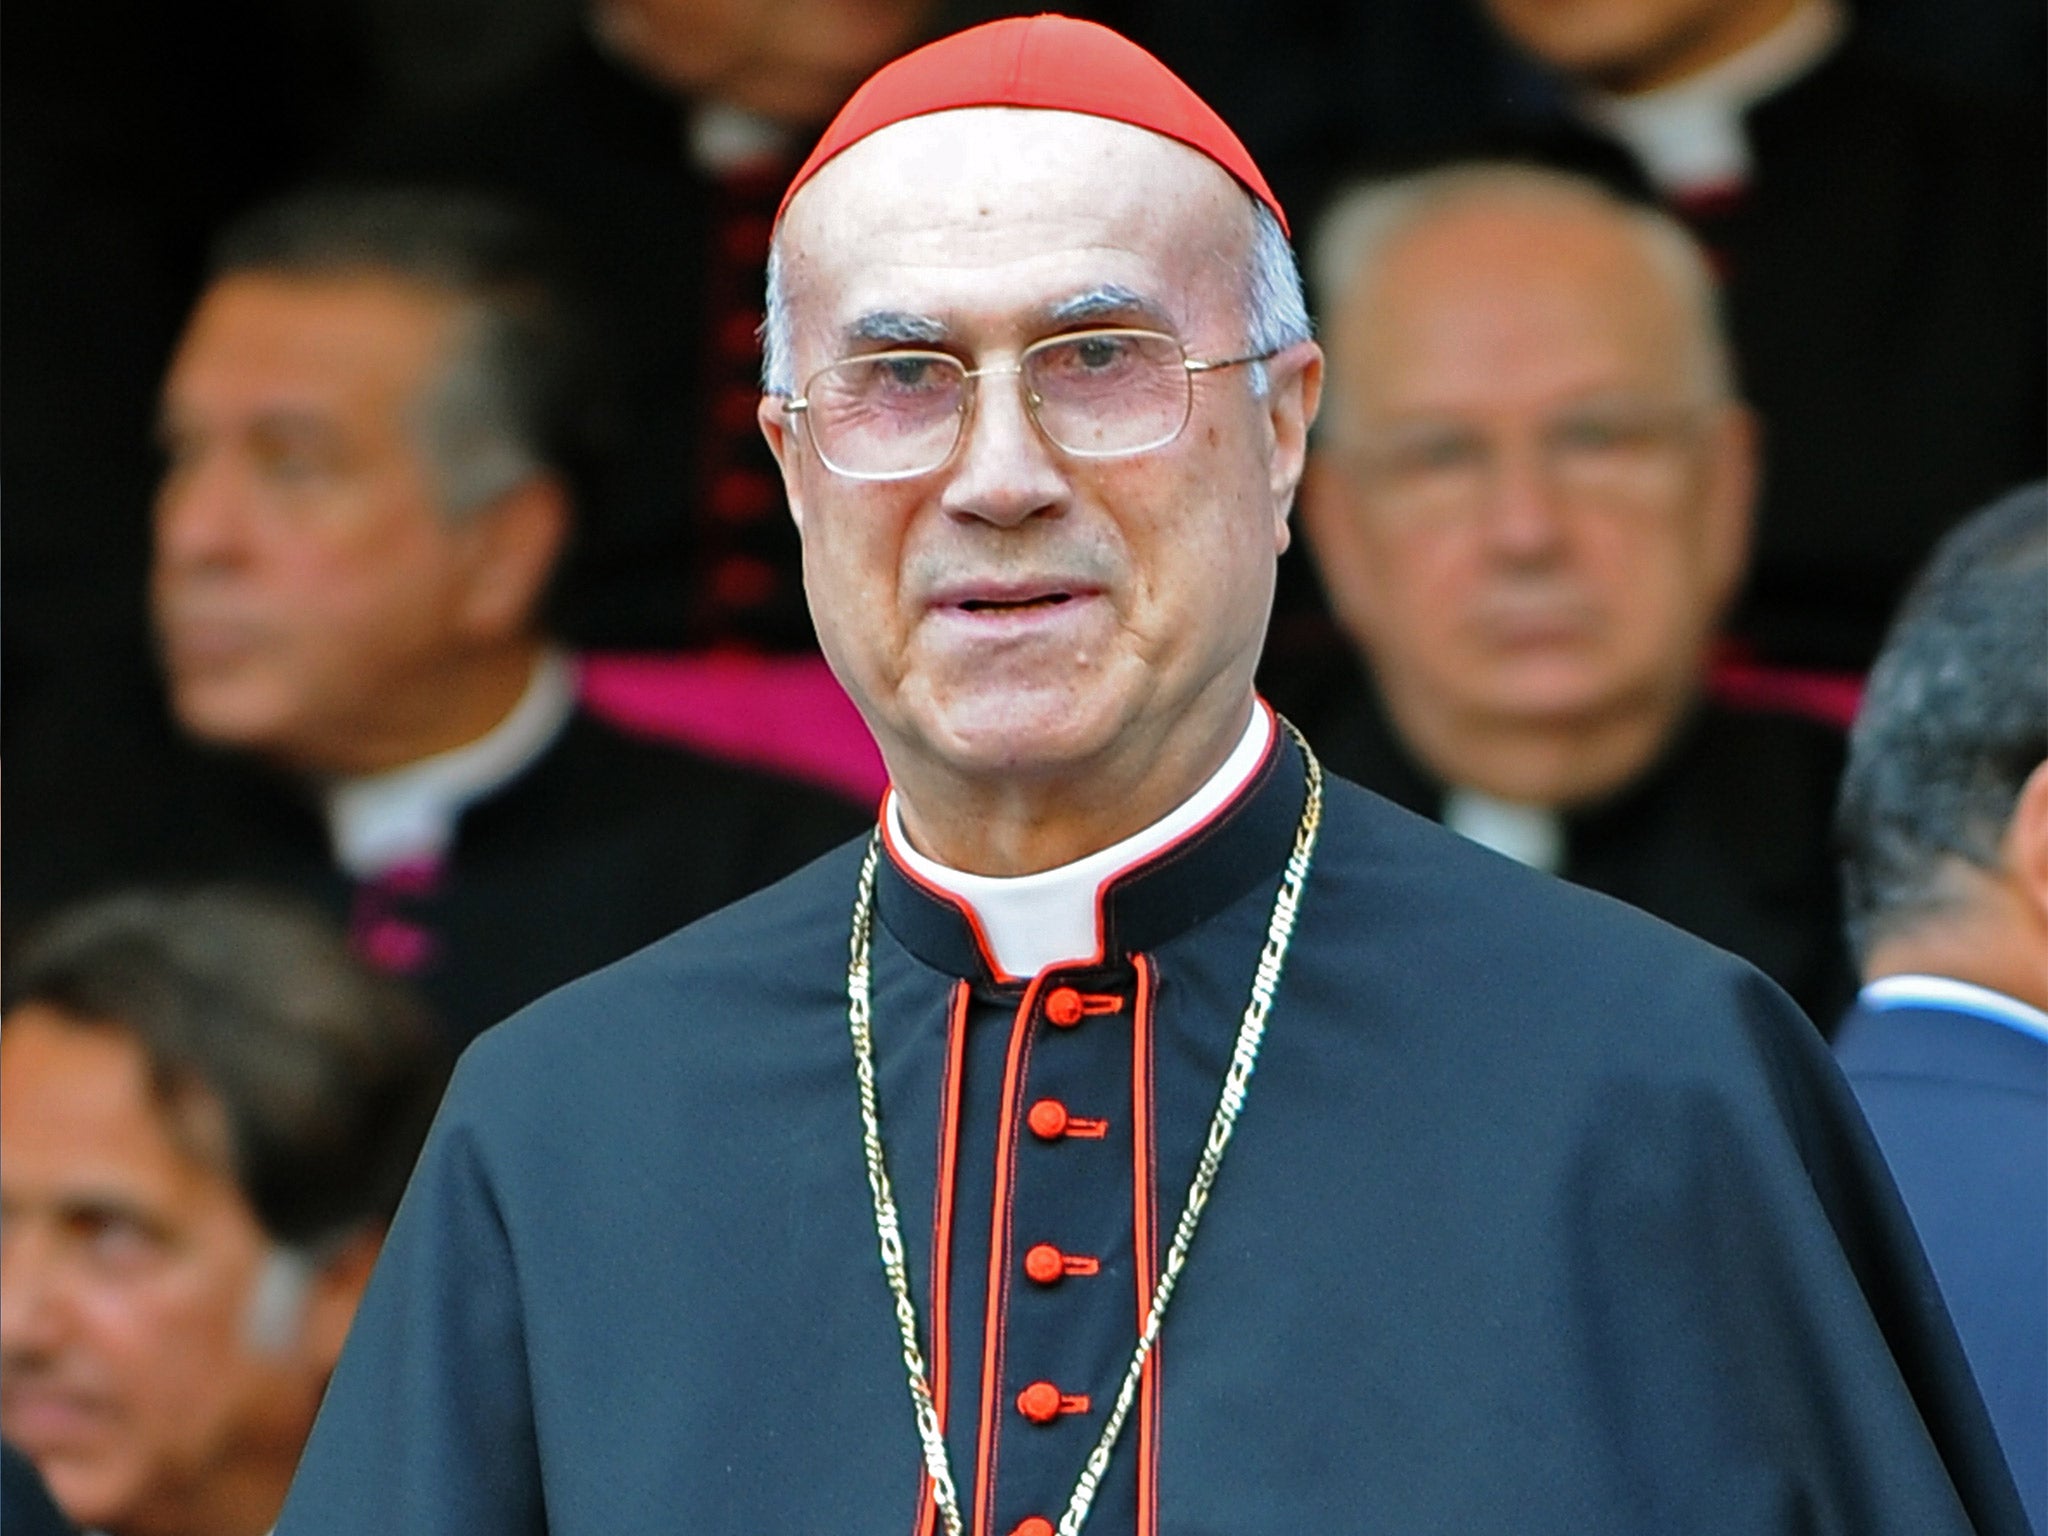 Cardinal Bertone was also accused of using money from a charity to refurbish his penthouse (Getty)